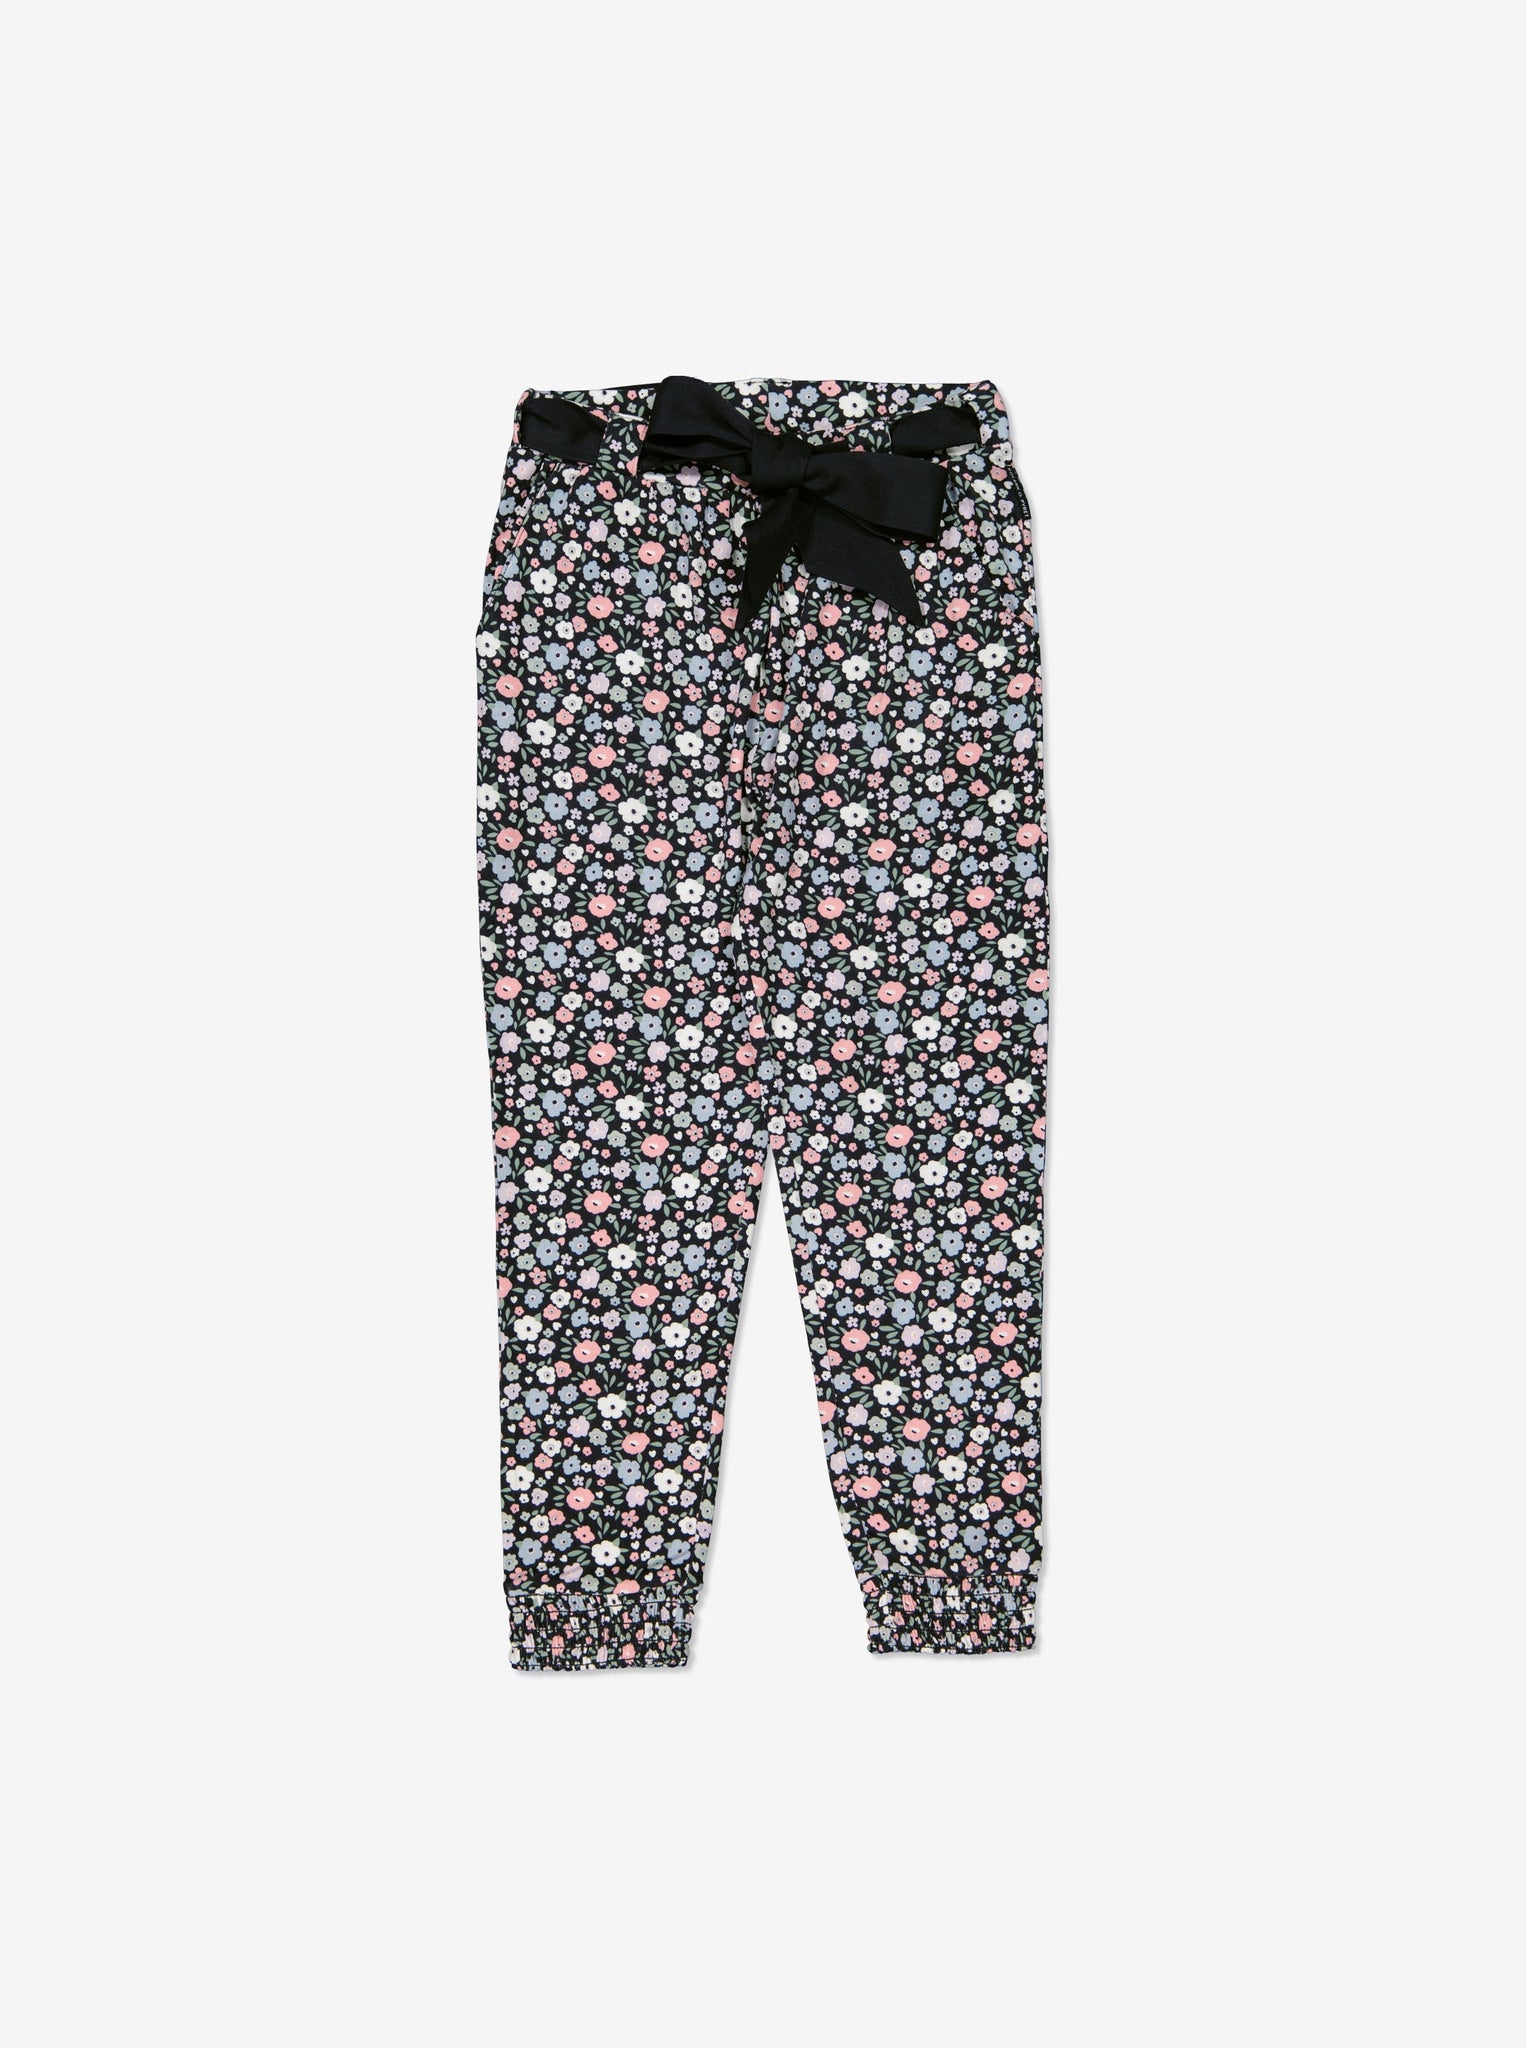  Floral Print Kids Joggers from Polarn O. Pyret Kidswear. Made using environmentally friendly materials.